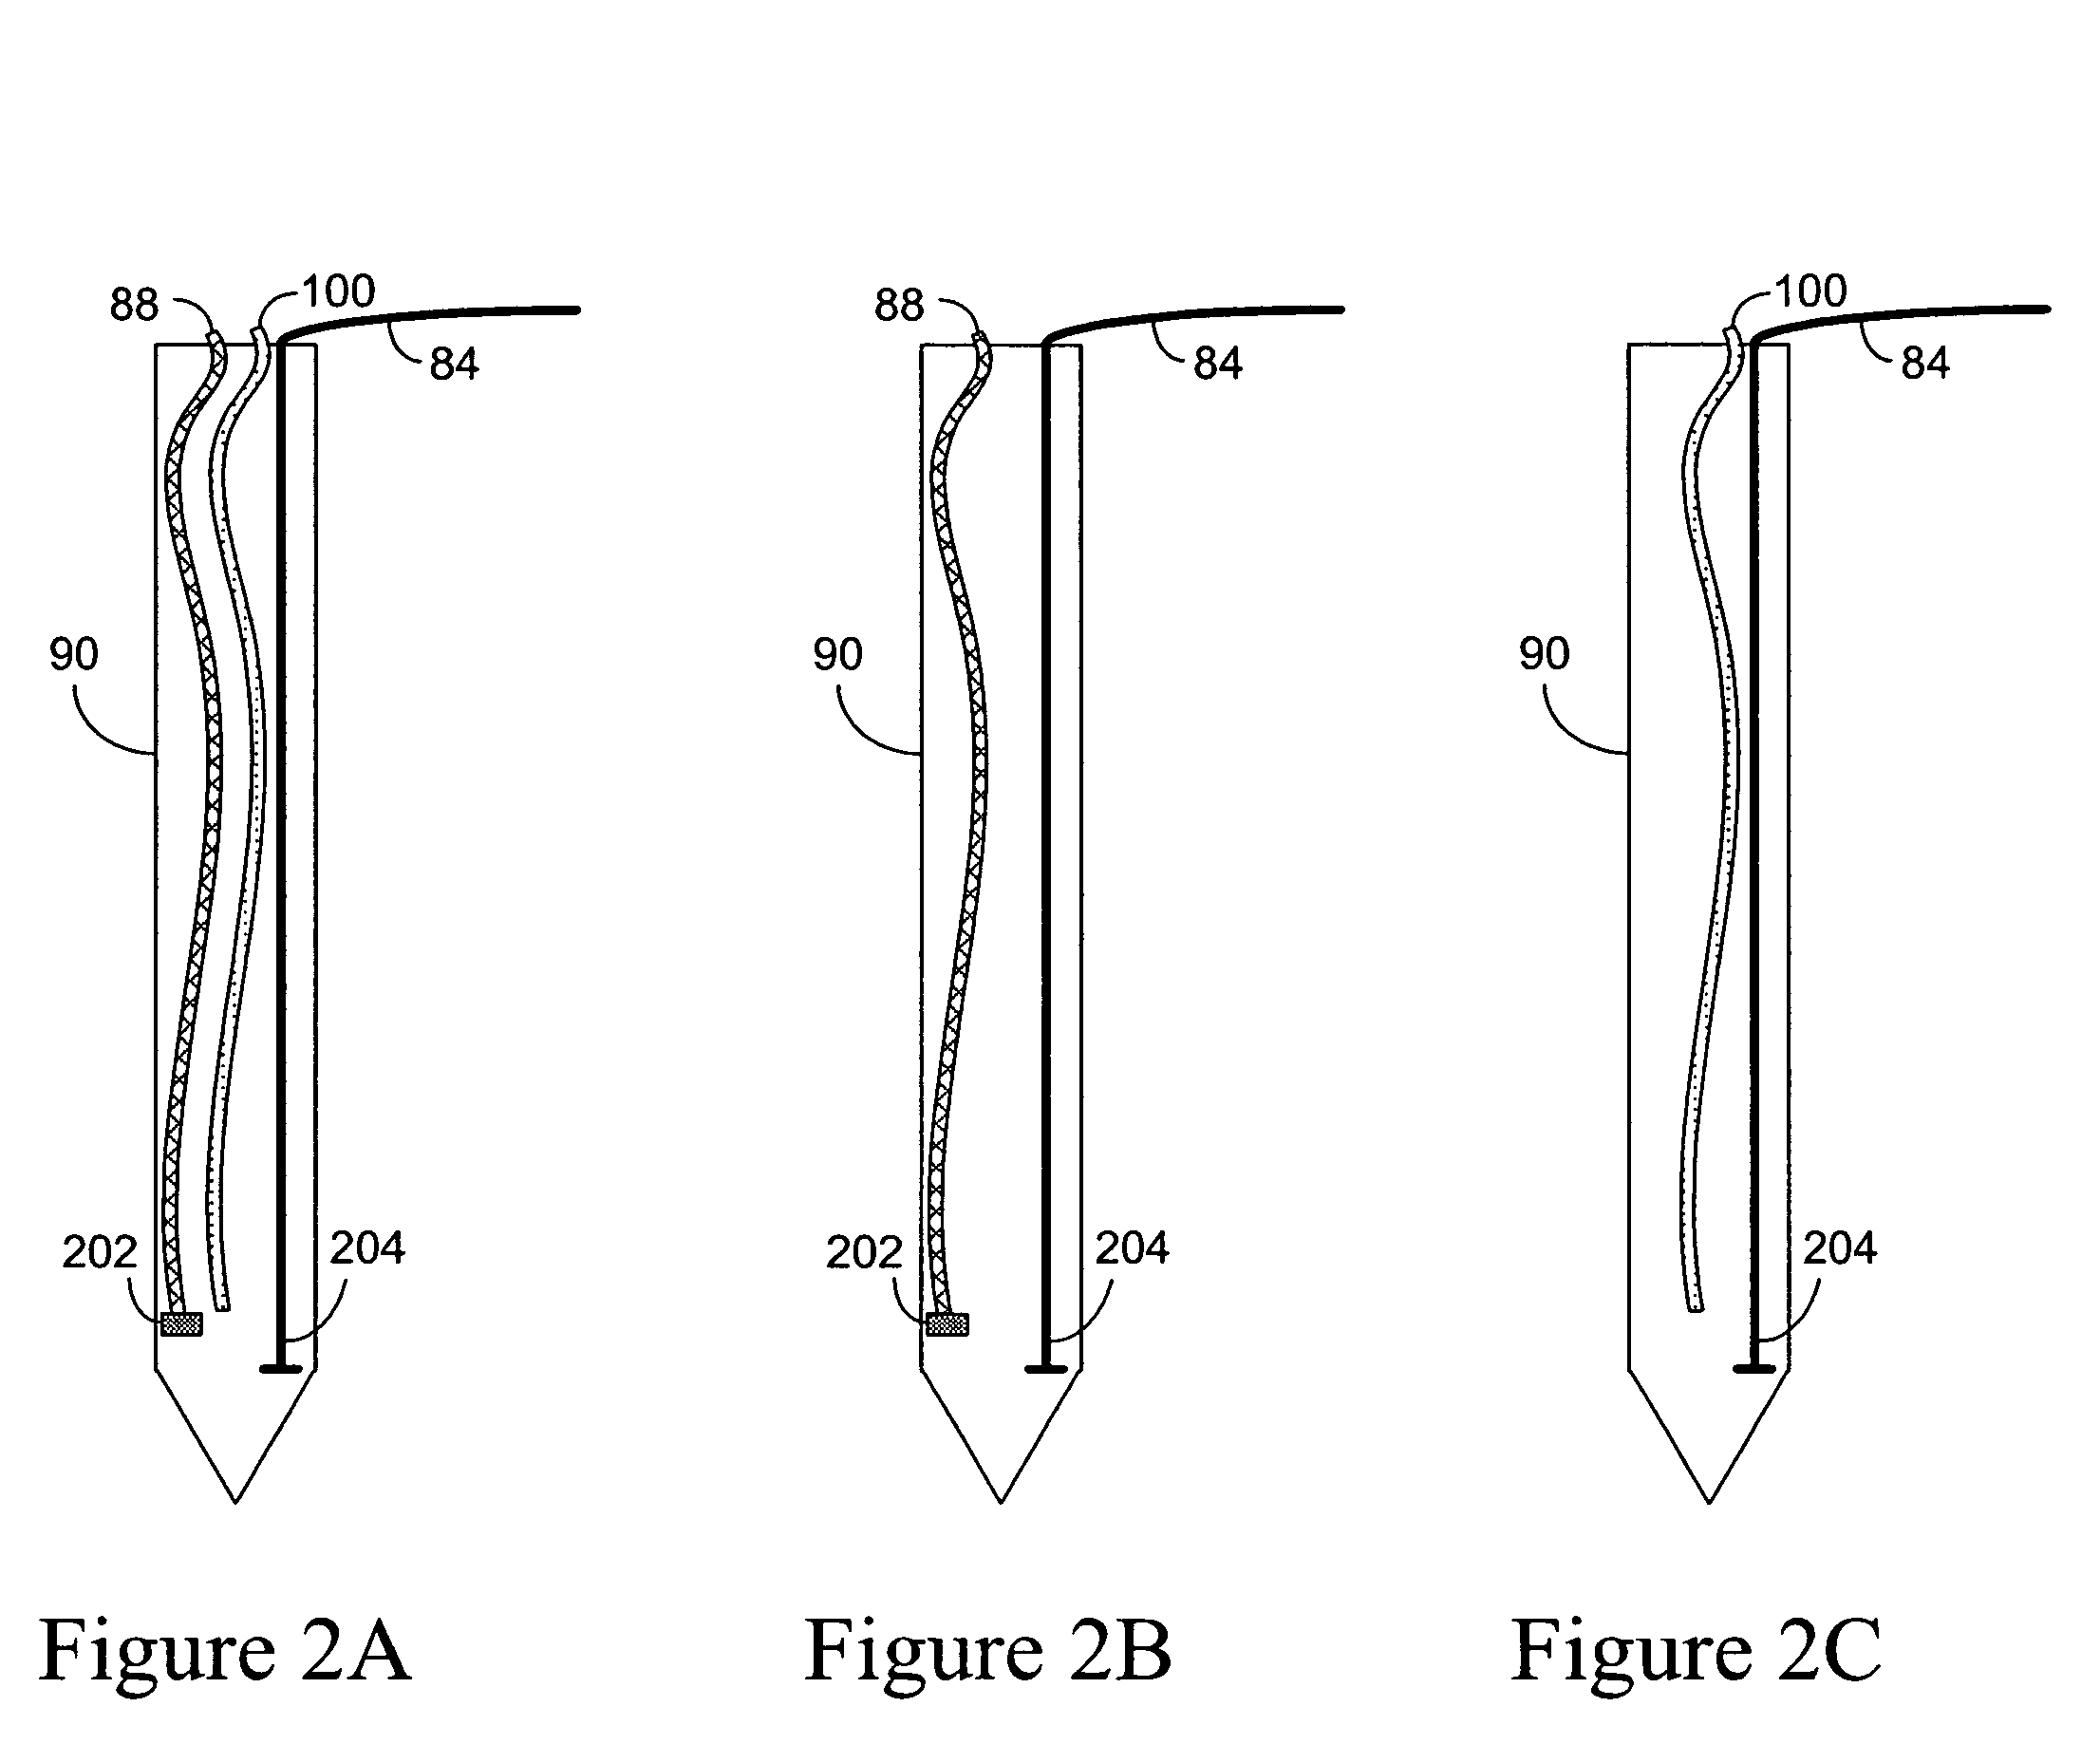 Systems and methods for monitoring temperature during electrosurgery or laser therapy